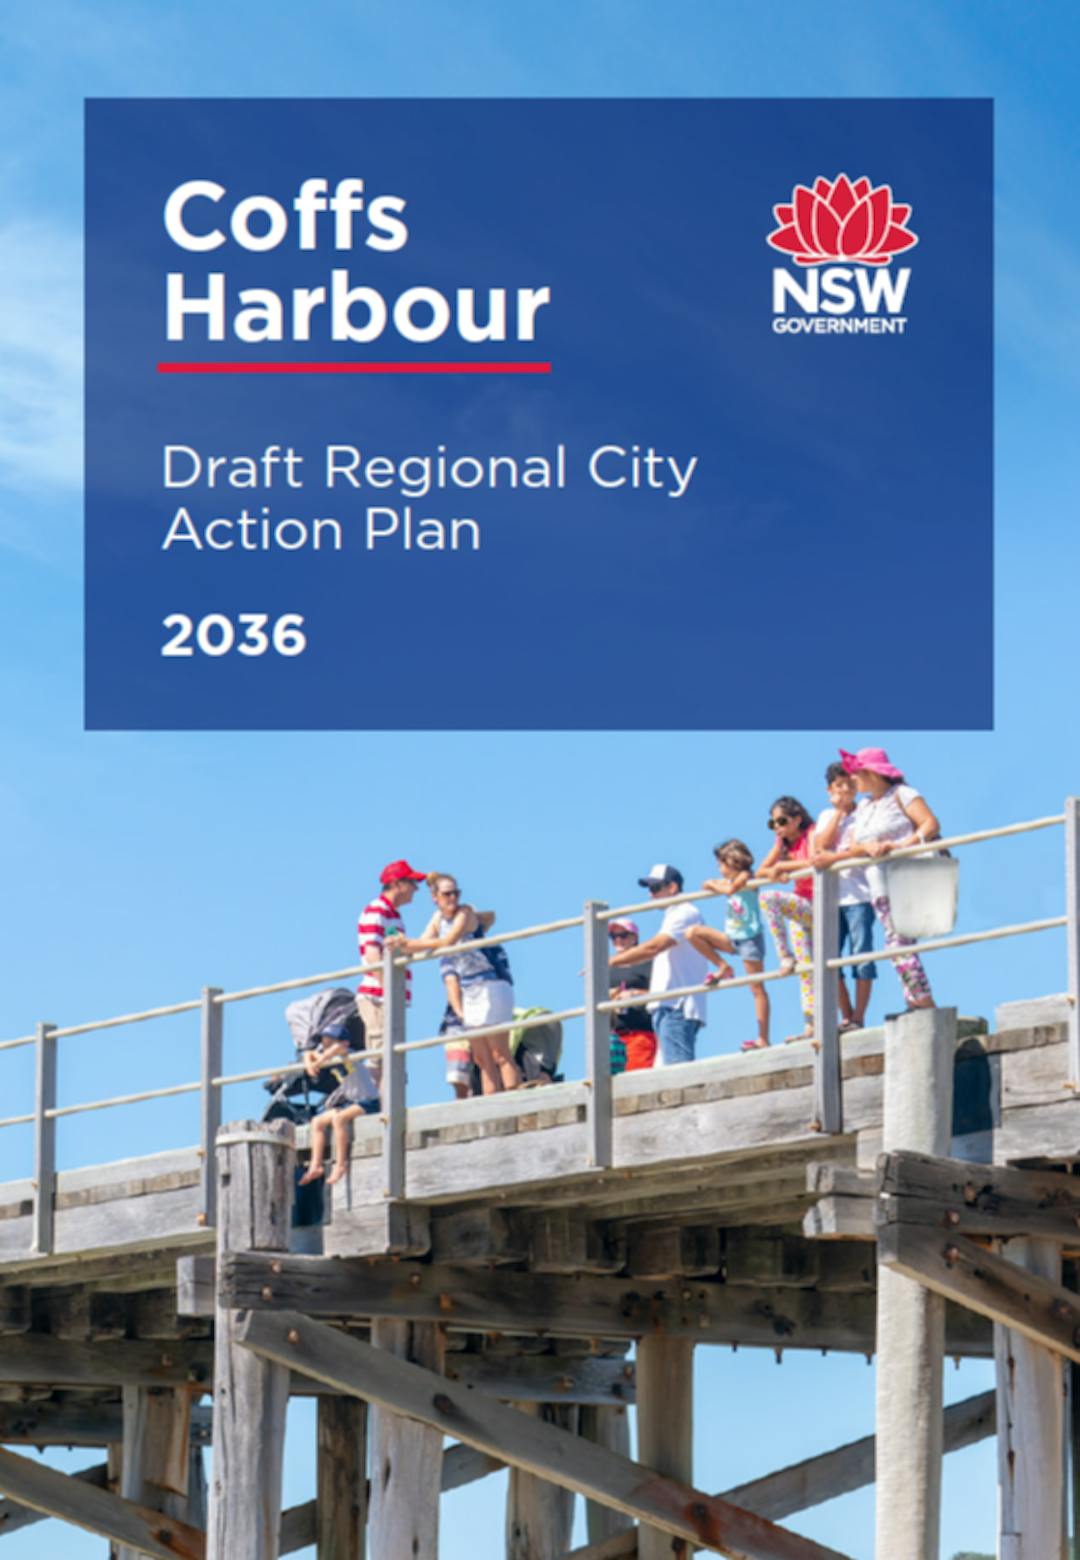 NSW Government Draft Regional City Action Plan 2036 is out for comment and feedback by 5pm 3rd July 2020.